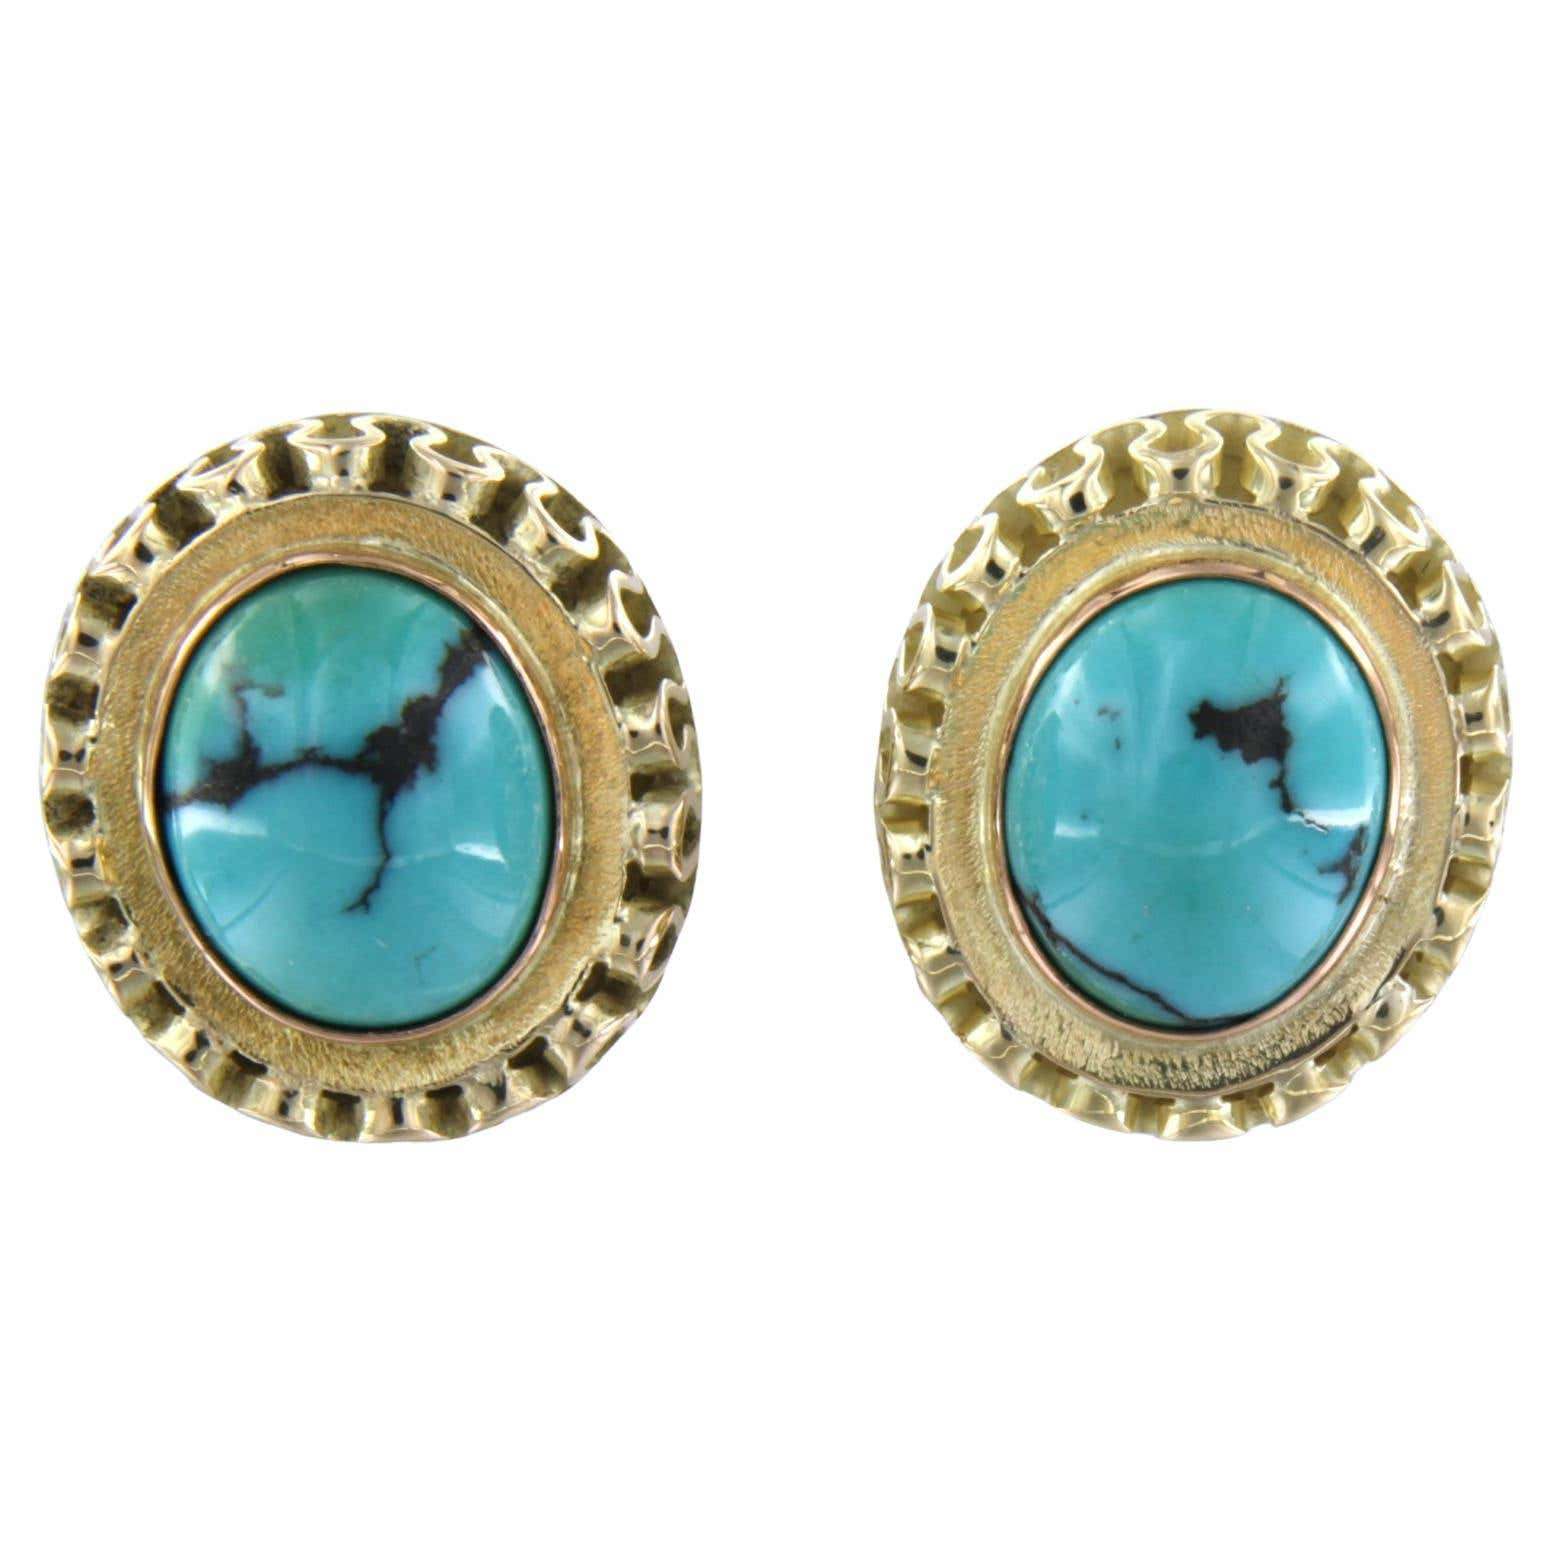 14k yellow gold stud earrings set with turquoise - size. 1.9cm x 1.7cm 